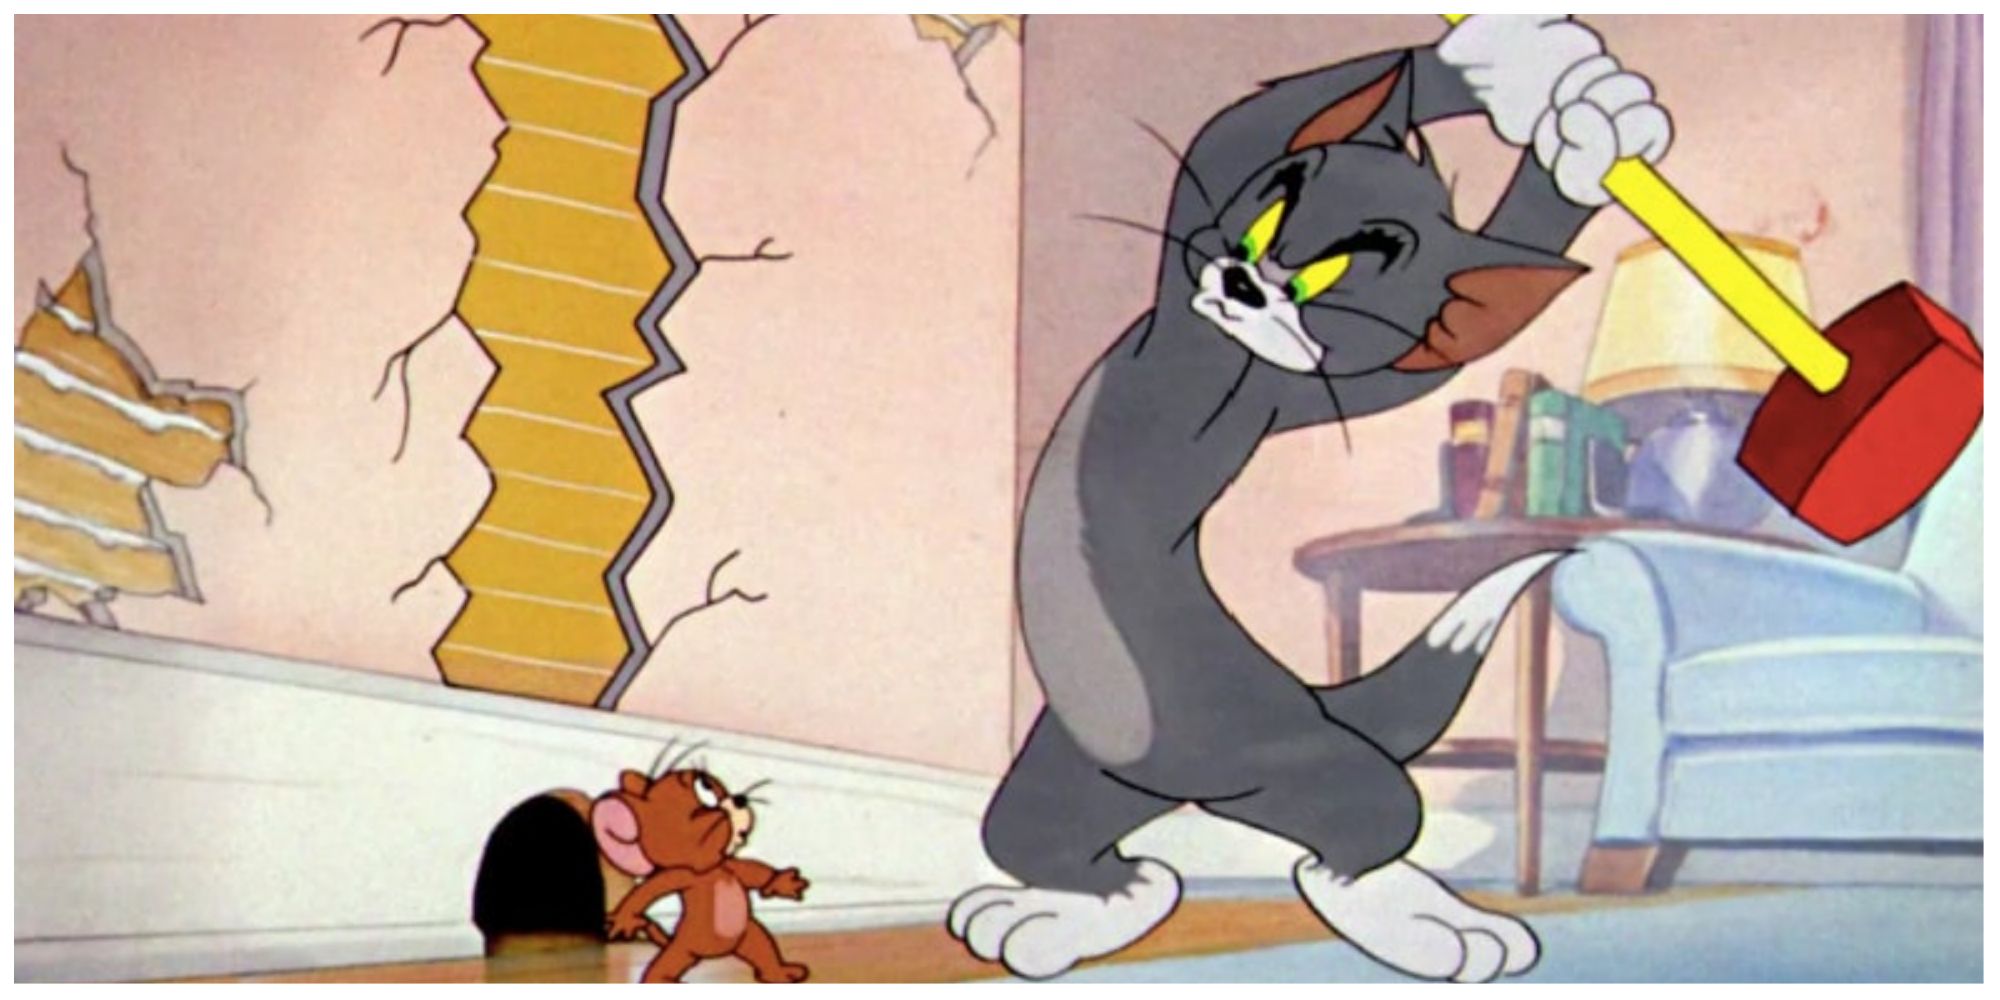 Tom trying to smash Jerry with a hammer